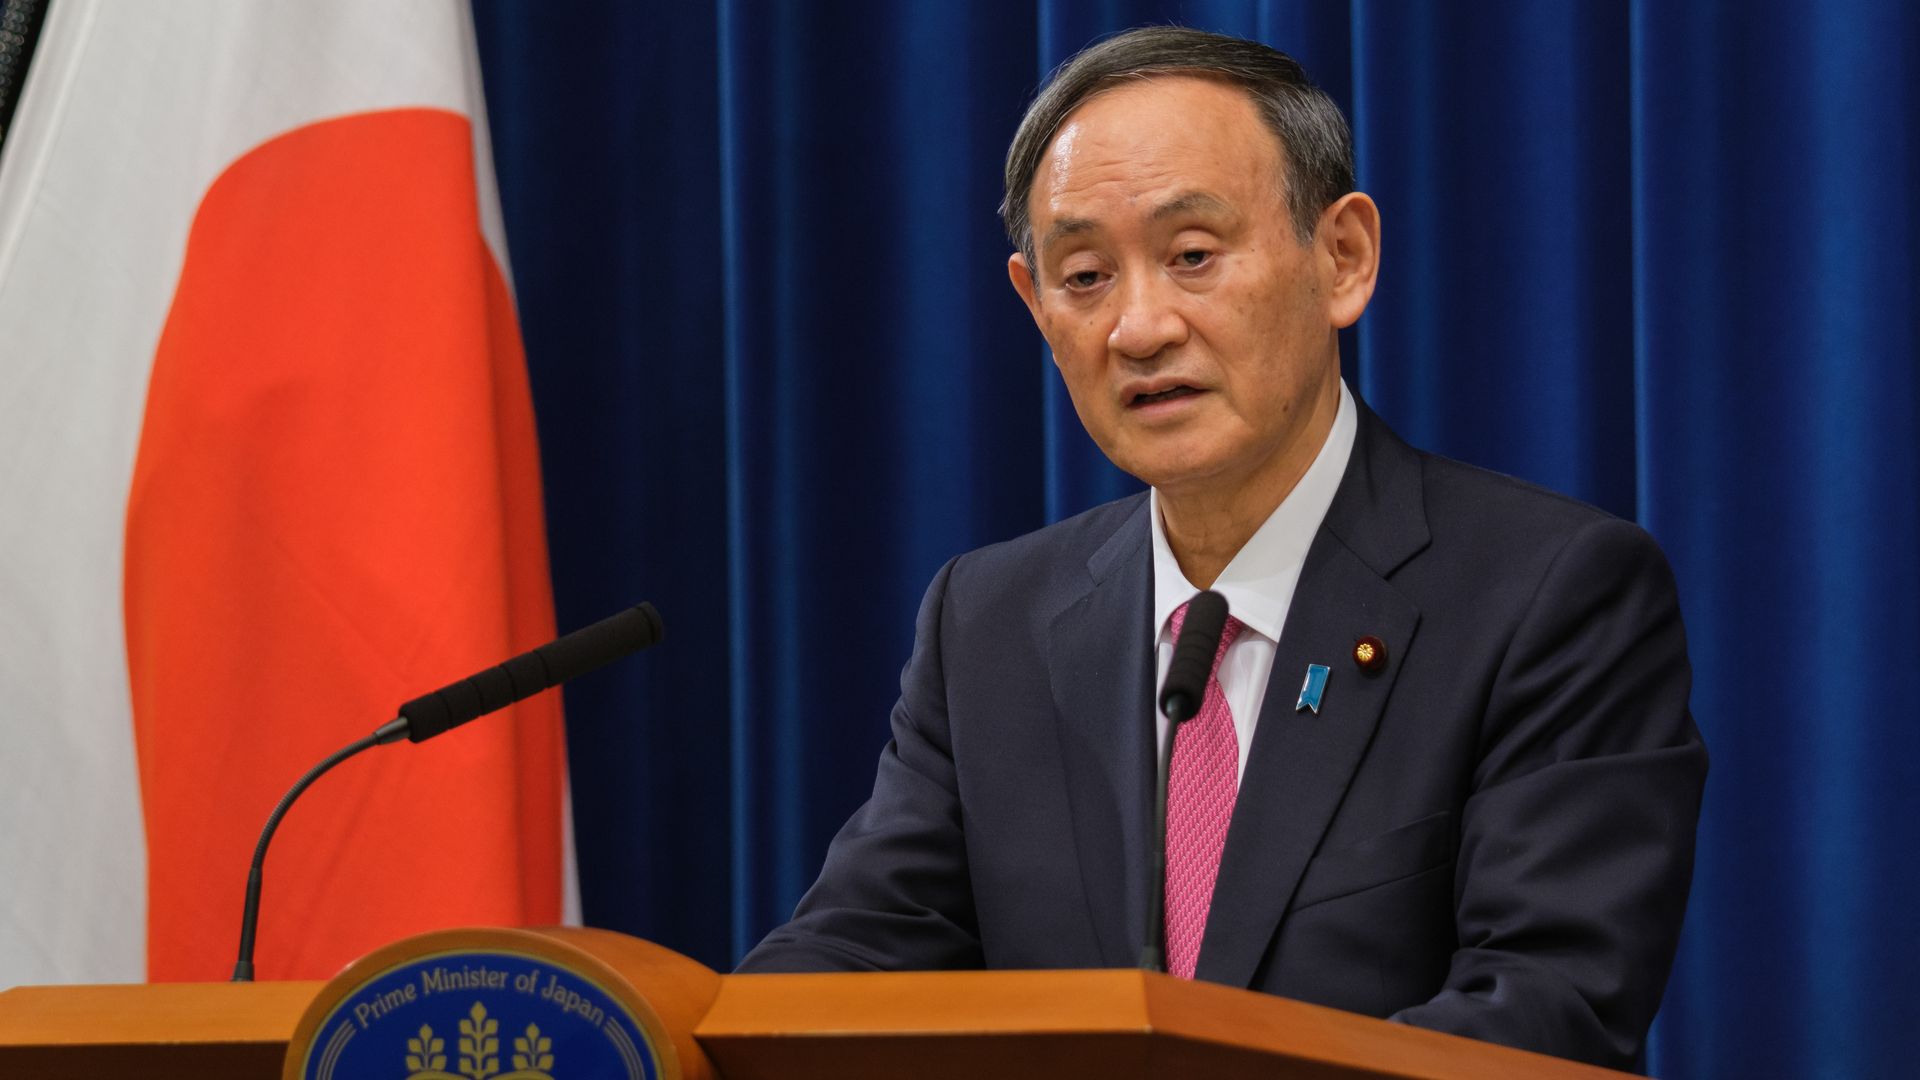 Japan's Prime Minister Yoshihide Suga speaking during a press conference in Tokyo on Dec. 25.